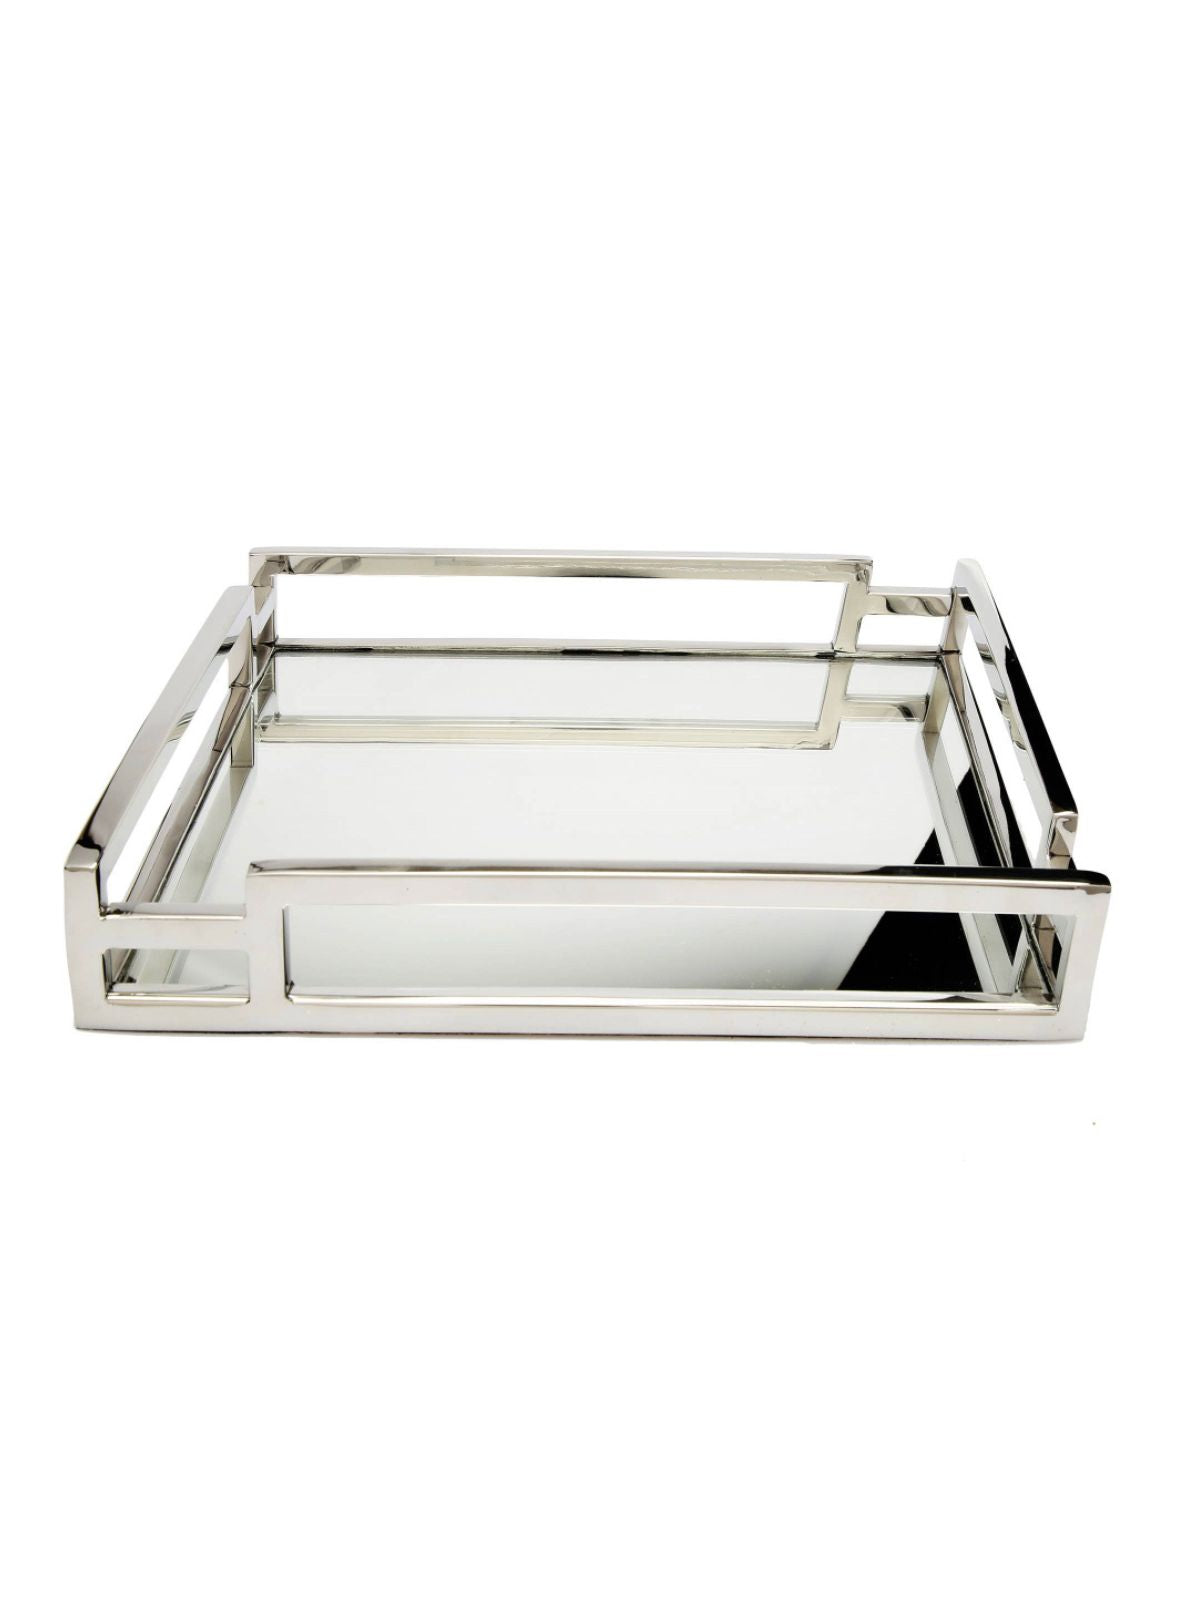 This luxurious 11.75in squared decorative tray features a mirror base and chrome loop design sold by KYA Home Decor.